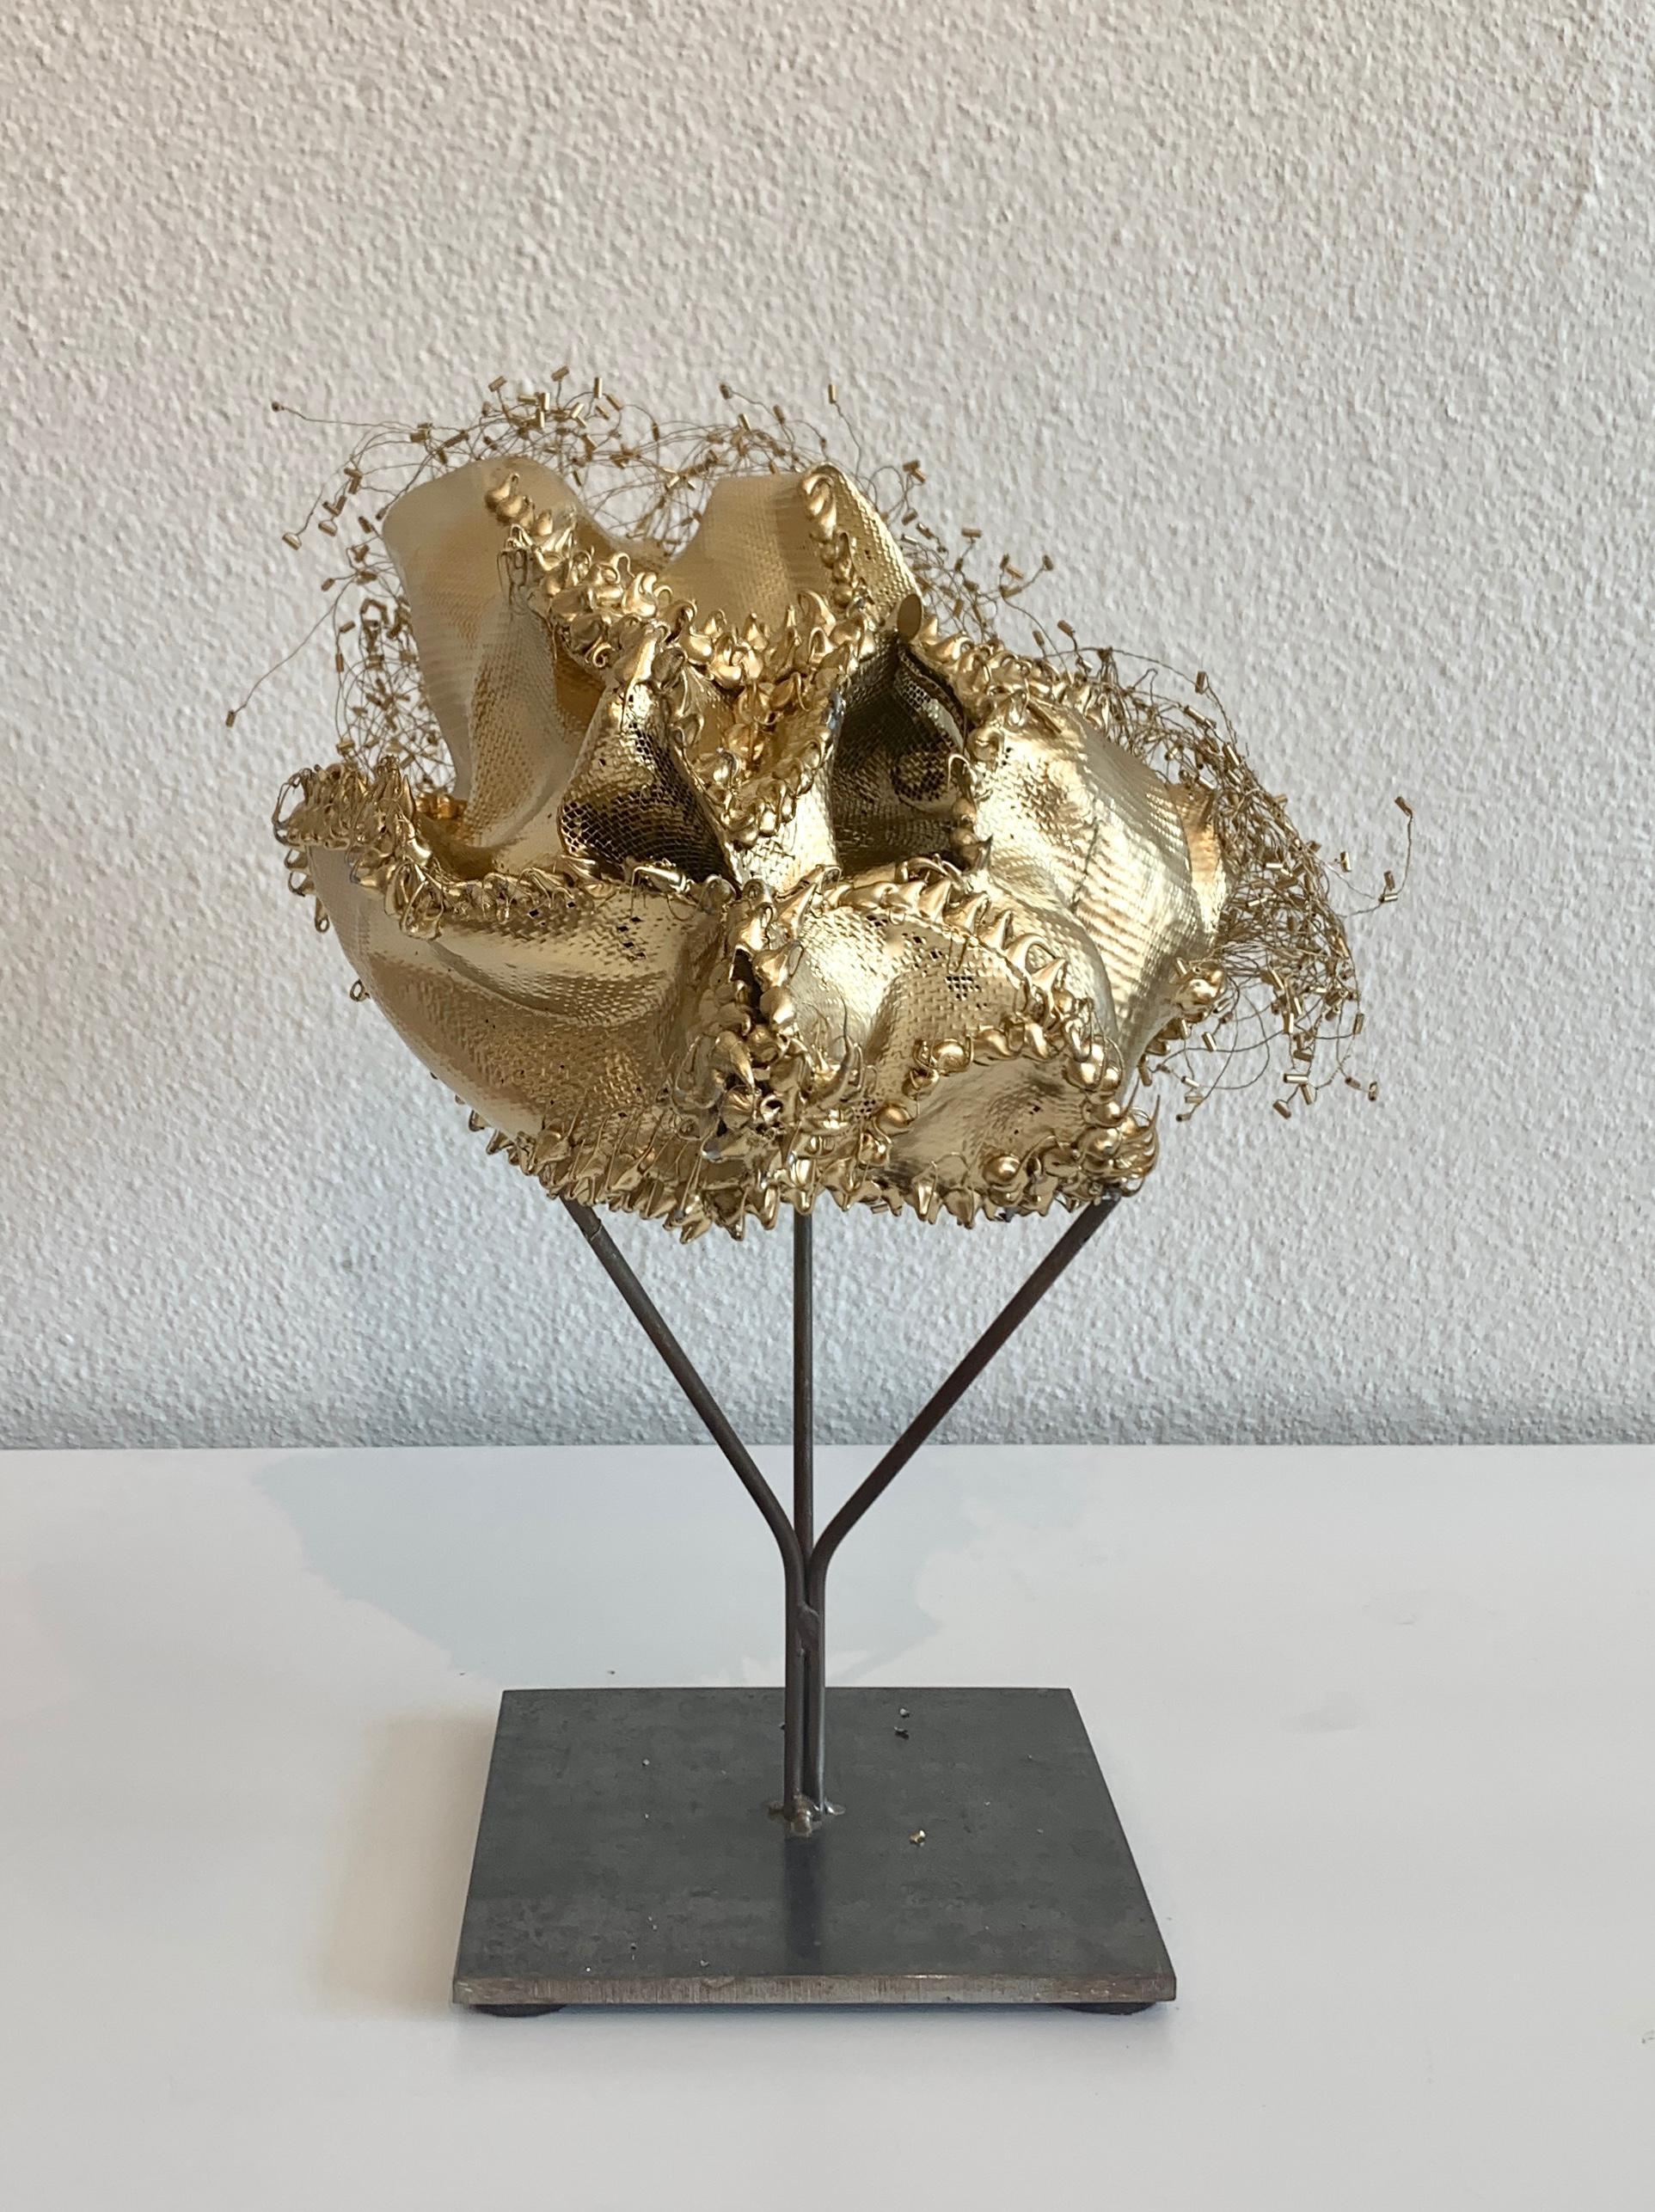 The Gathering Gilded, Atticus Adams Gold Metal Mesh Standing Sculpture with Black Stand

Metal fiber sculpture that incorporates fascinating light and shadow into its form.
​​
From Atticus Adams:
​
“I like to think of my work as Neo-Appalachian Folk